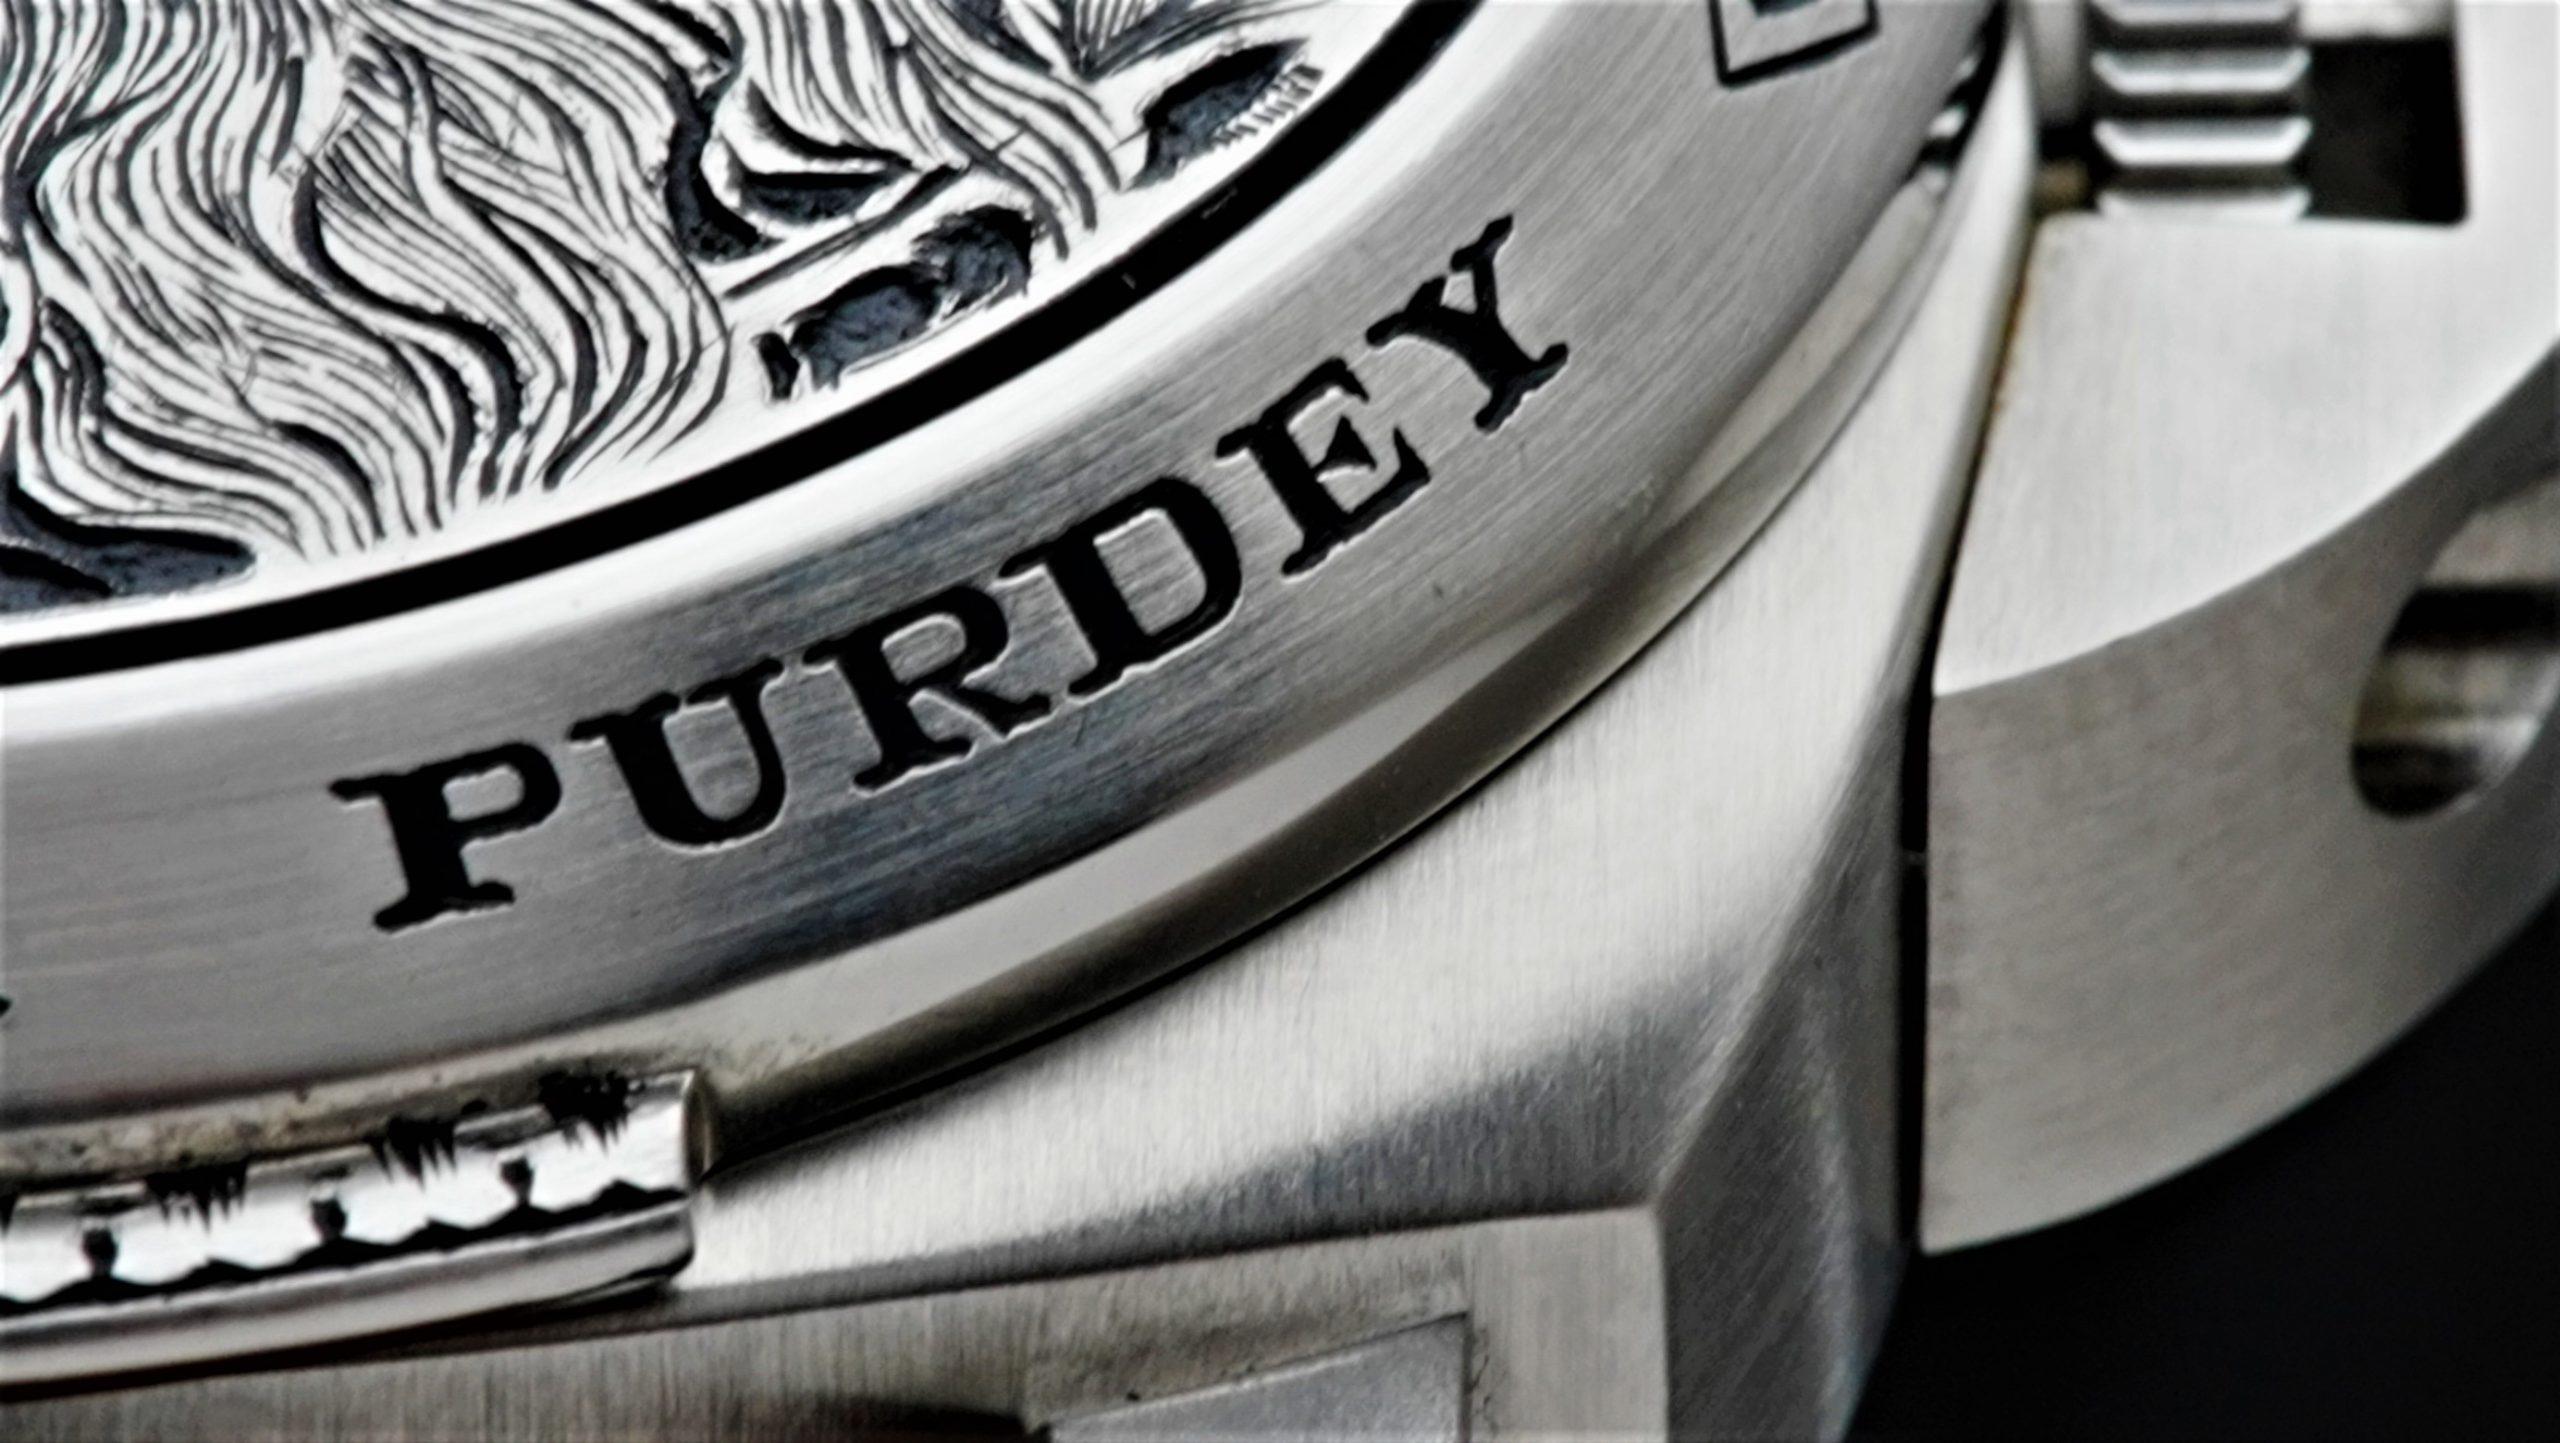 Panerai Luminor For Purdey Limired Edition up close of name Purdey.